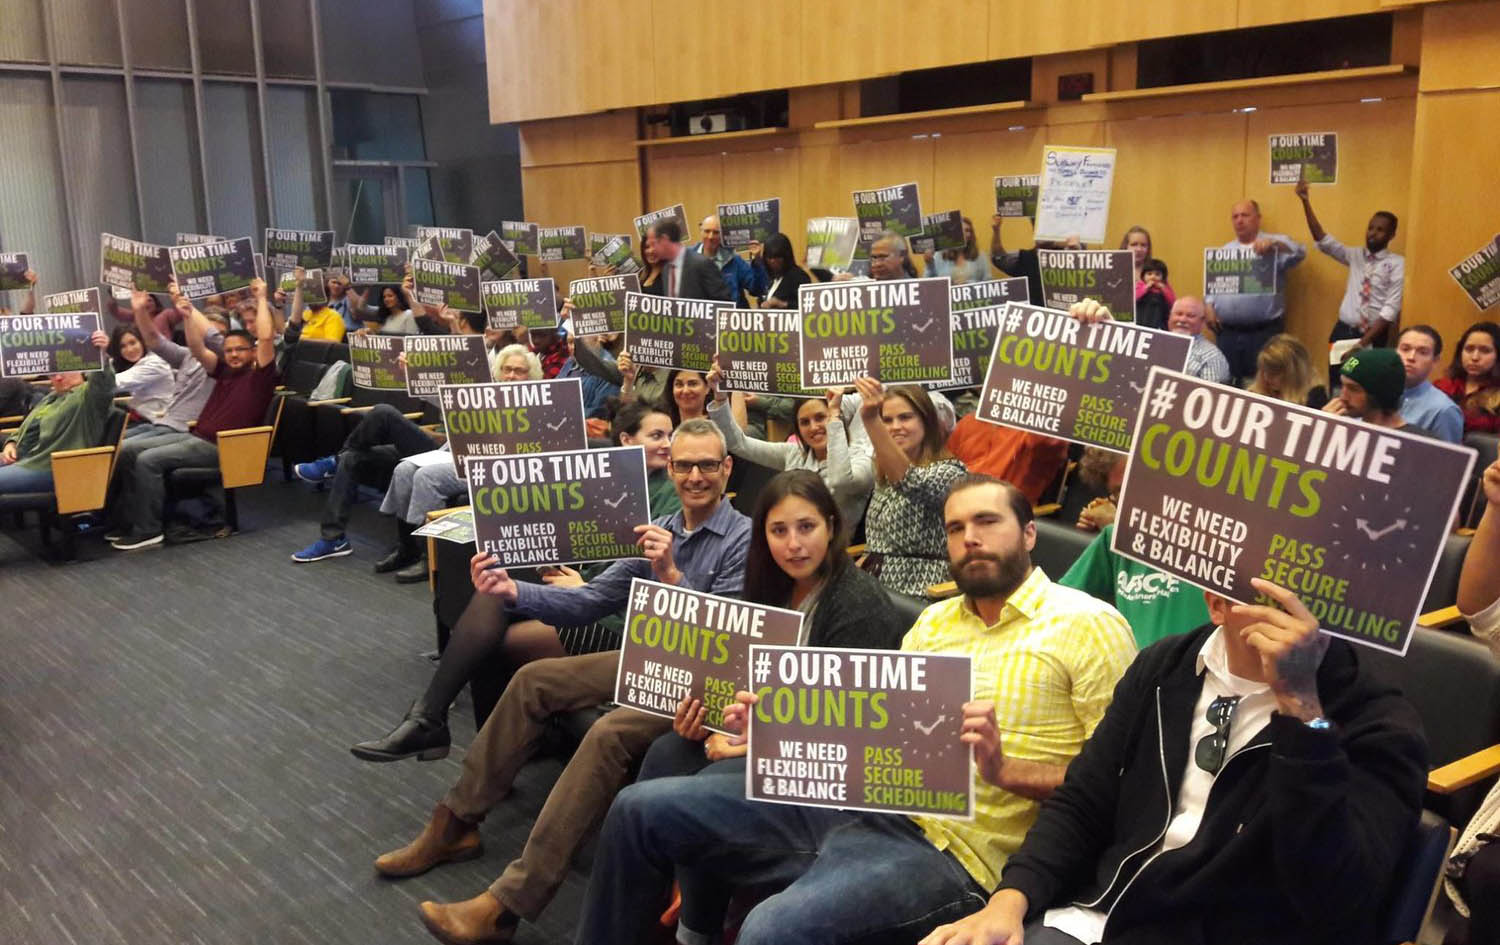 The Seattle City Council‘s first hearing on fair